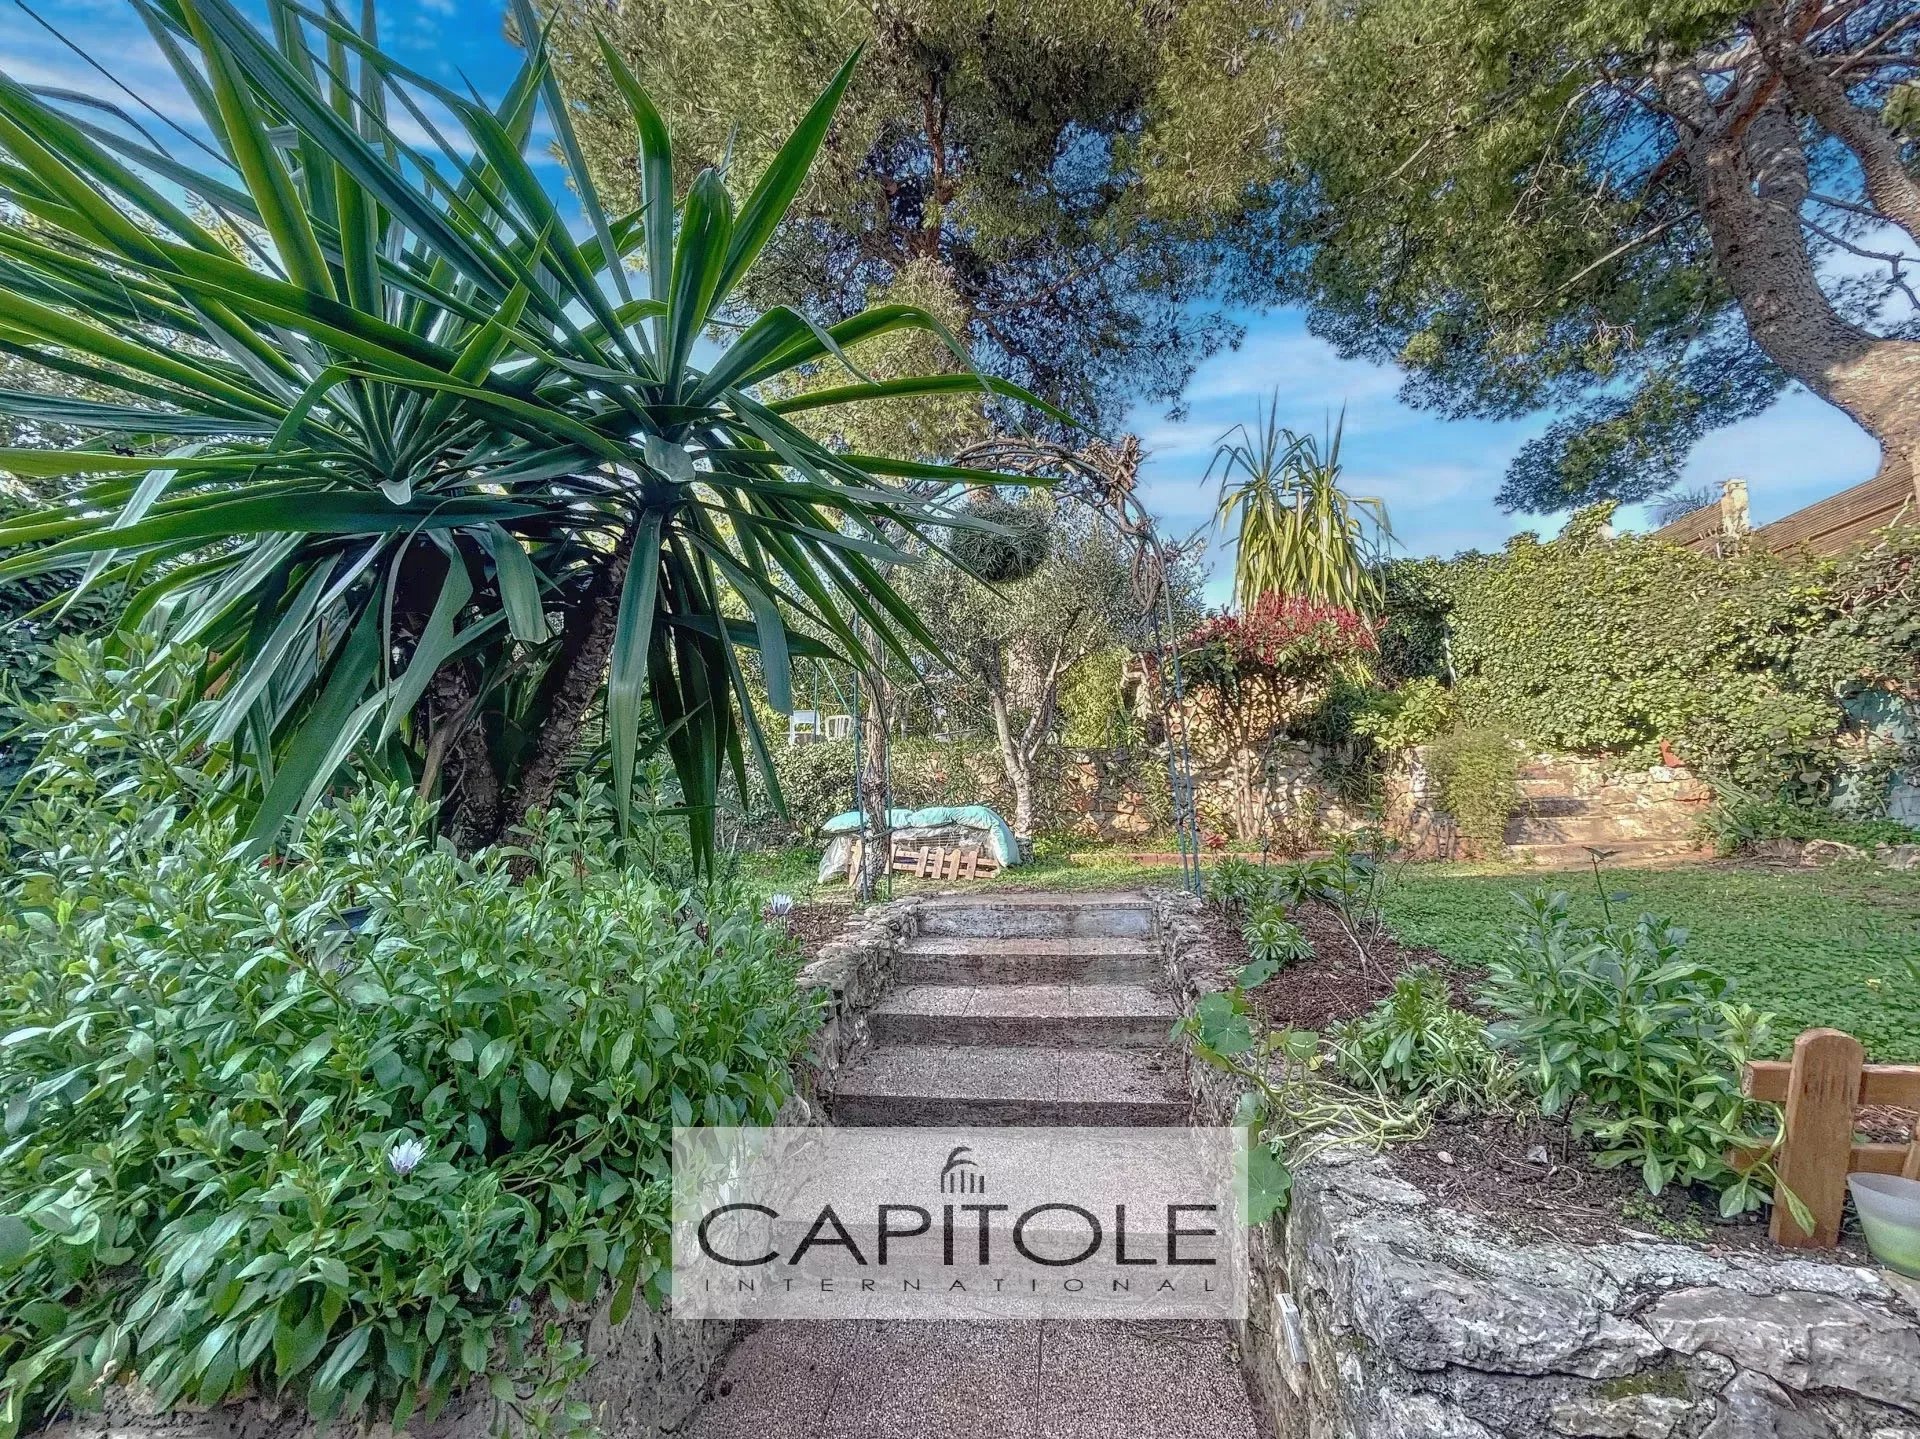 Antibes  for sale  villa of 105sqm with garden. 4 bedrooms.